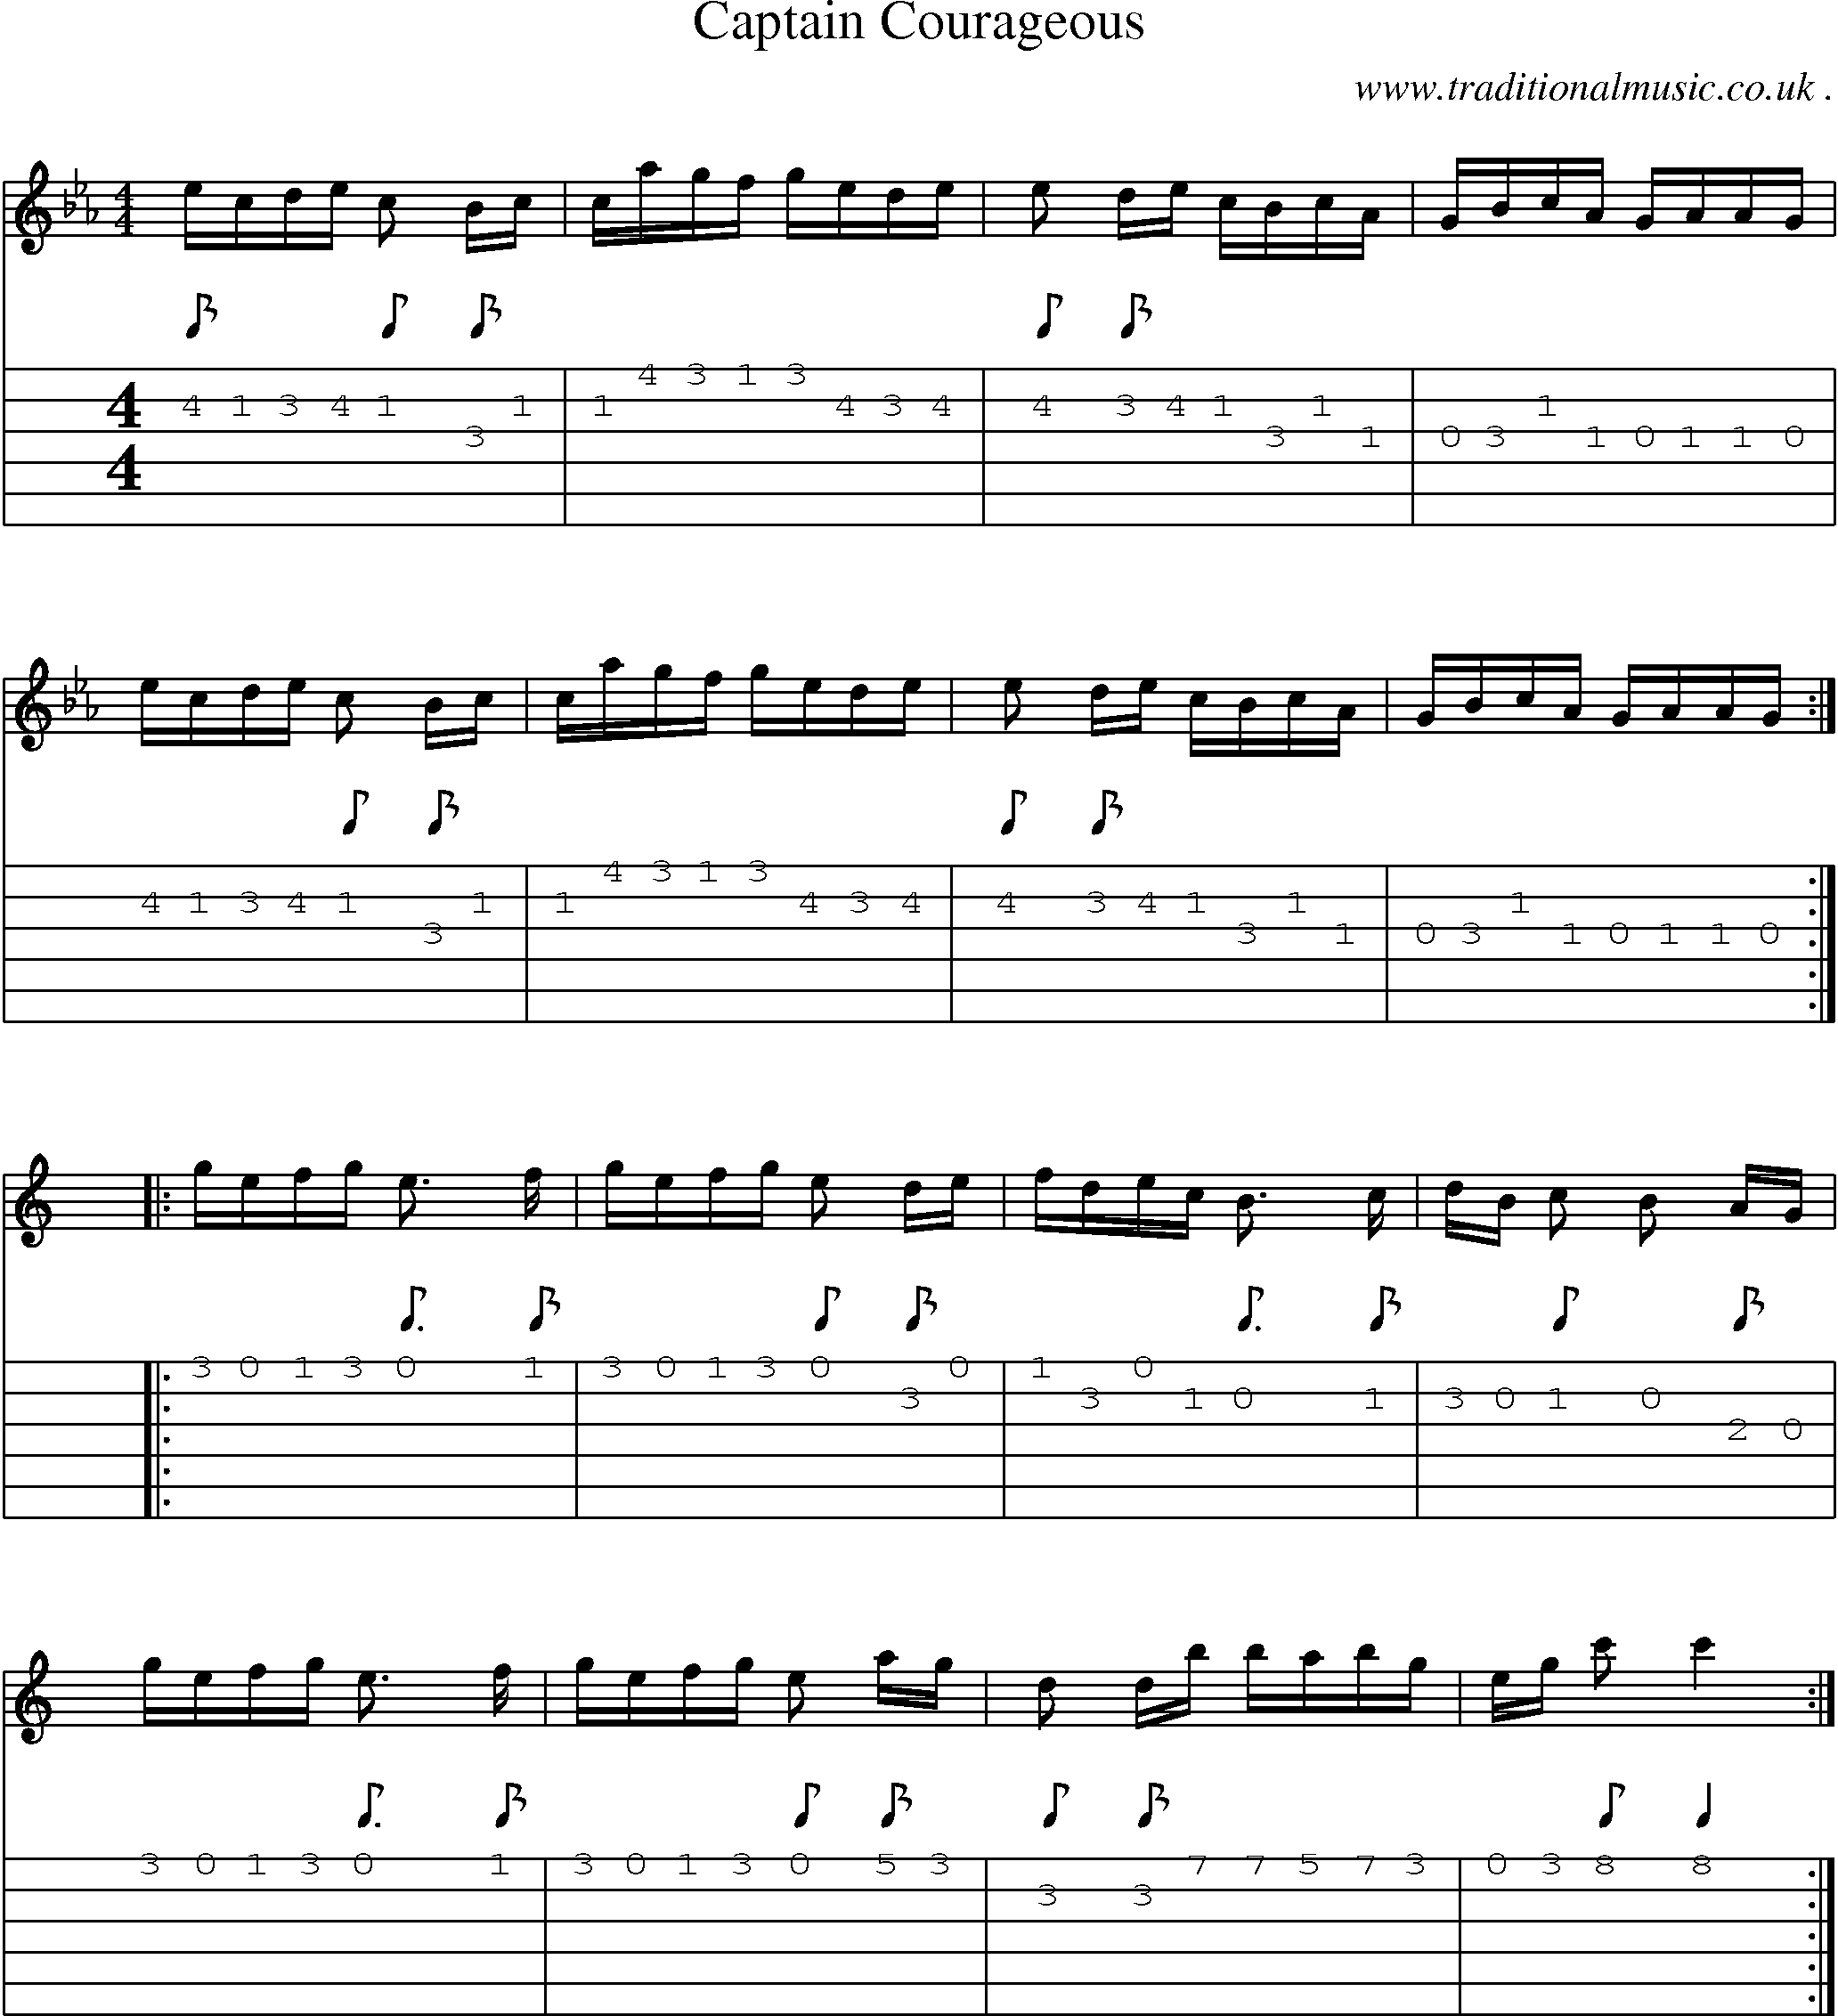 Sheet-Music and Guitar Tabs for Captain Courageous